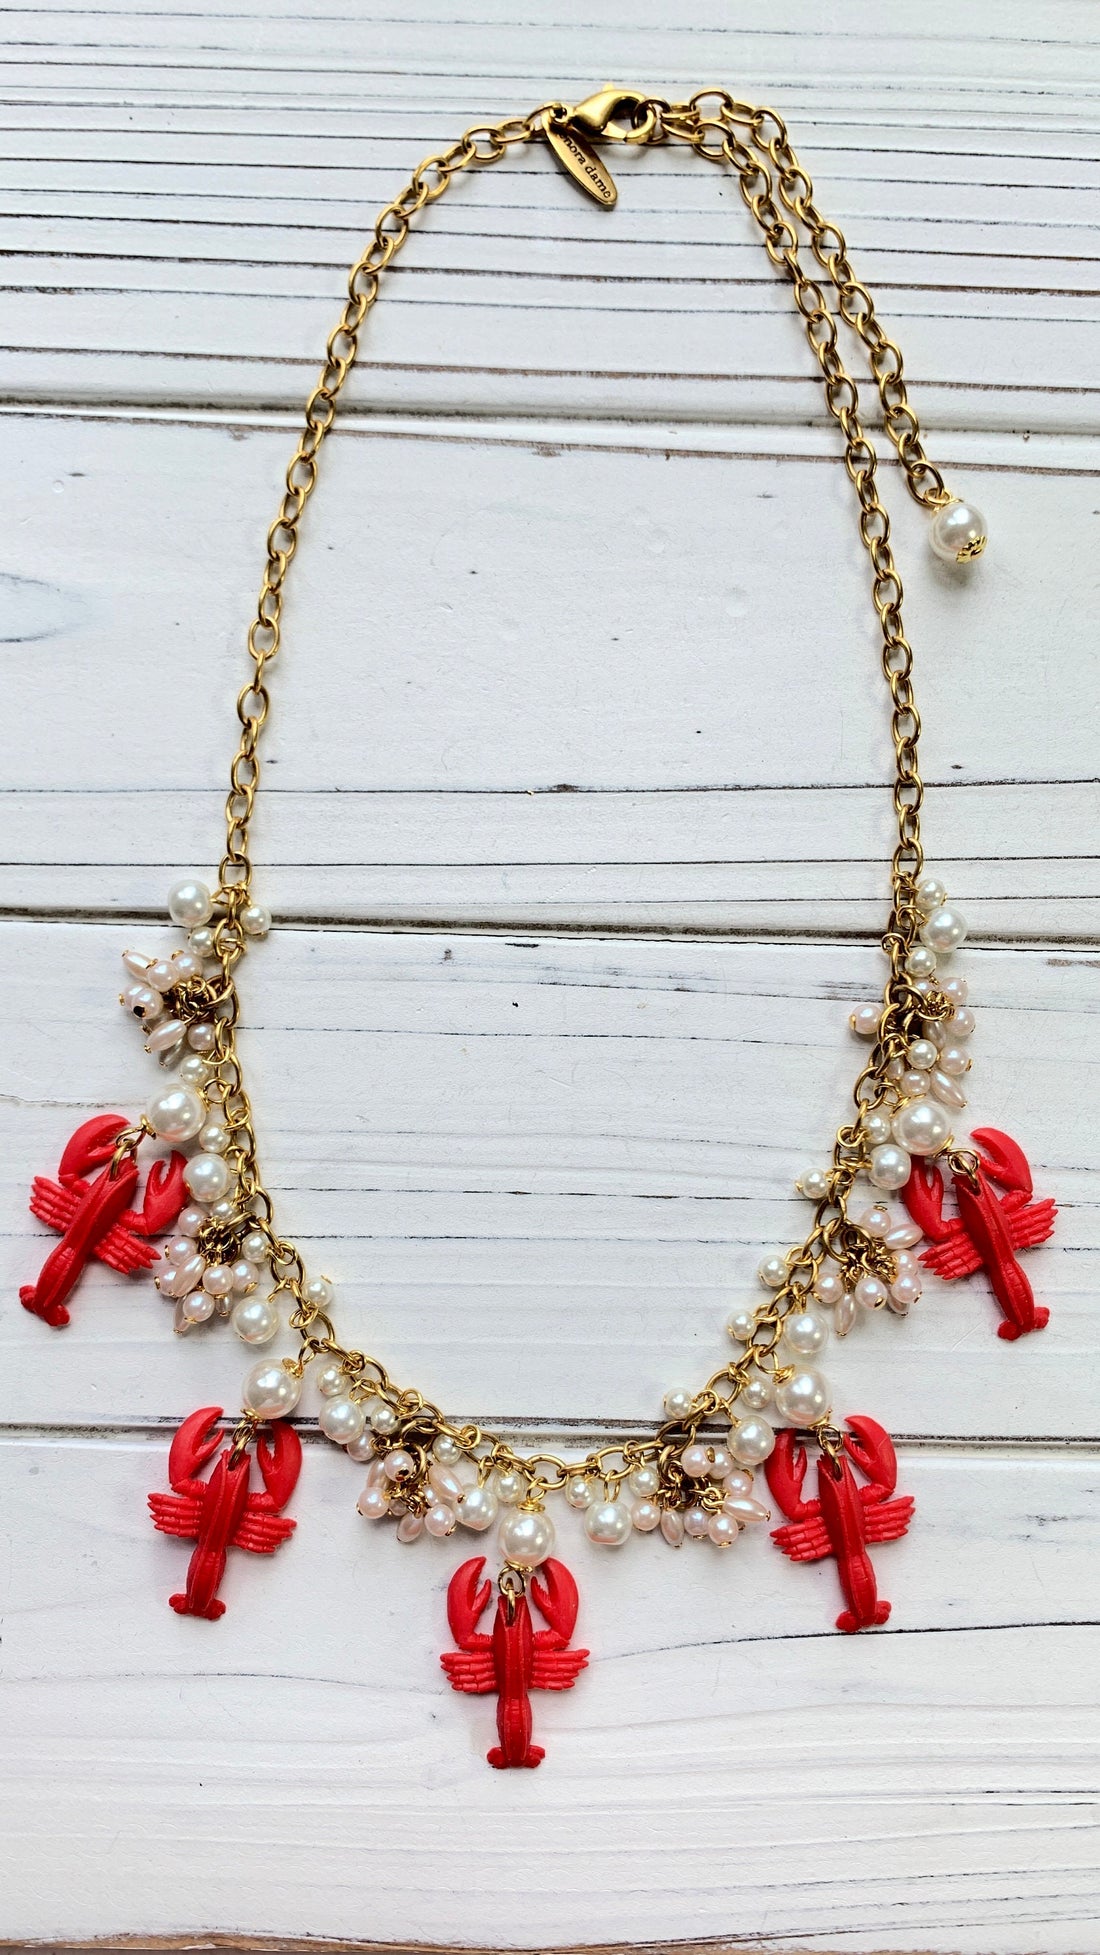 Lenora Dame Lobster Charm Necklace